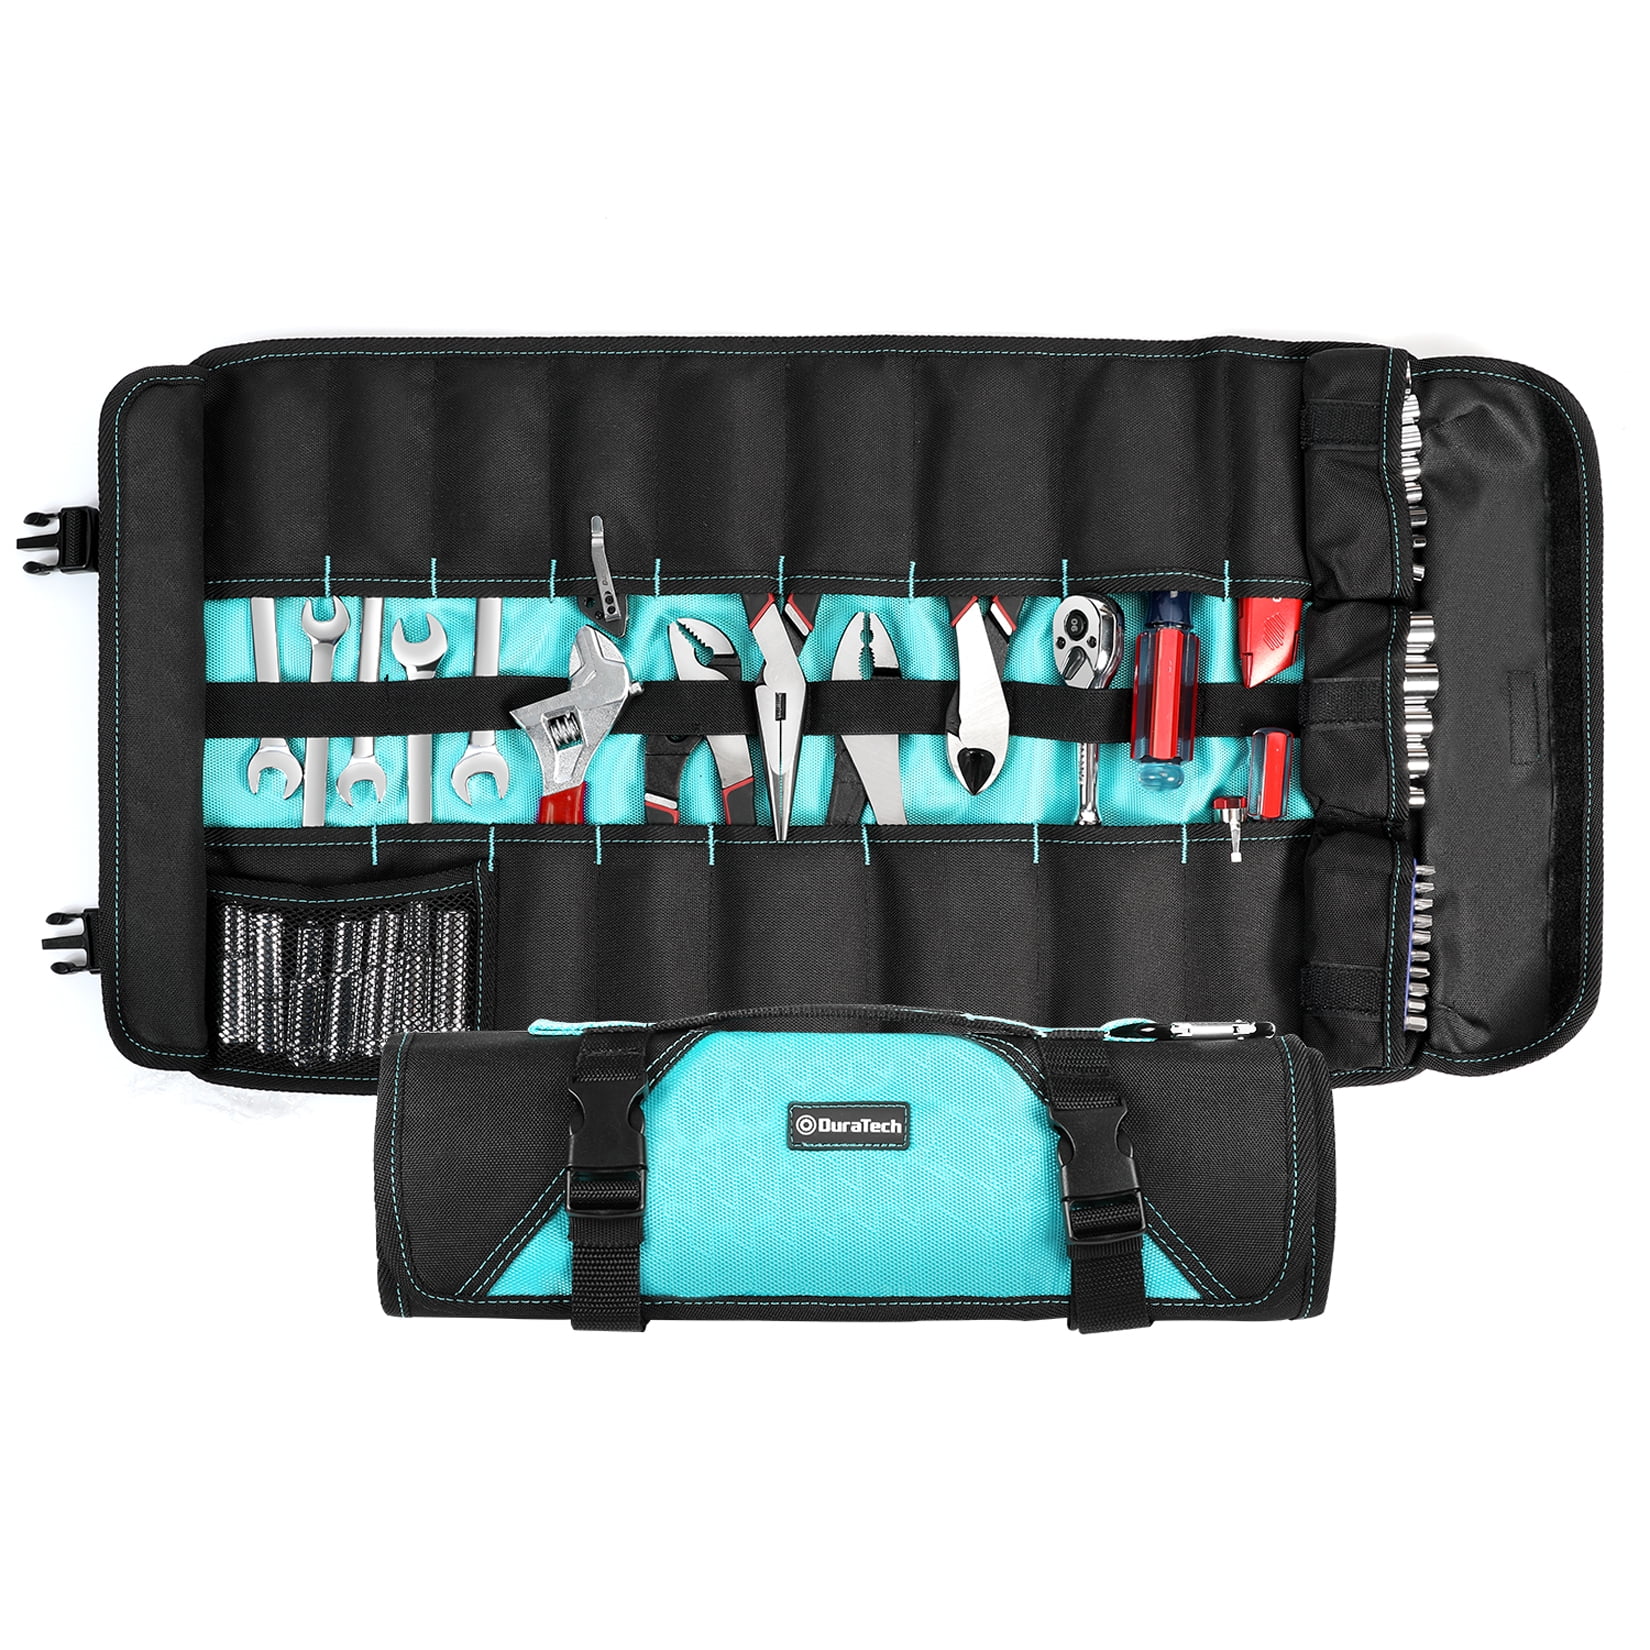 Black Roll 20 Pocket Tool Bag For Organizing and Storing of Wrenches and Tool